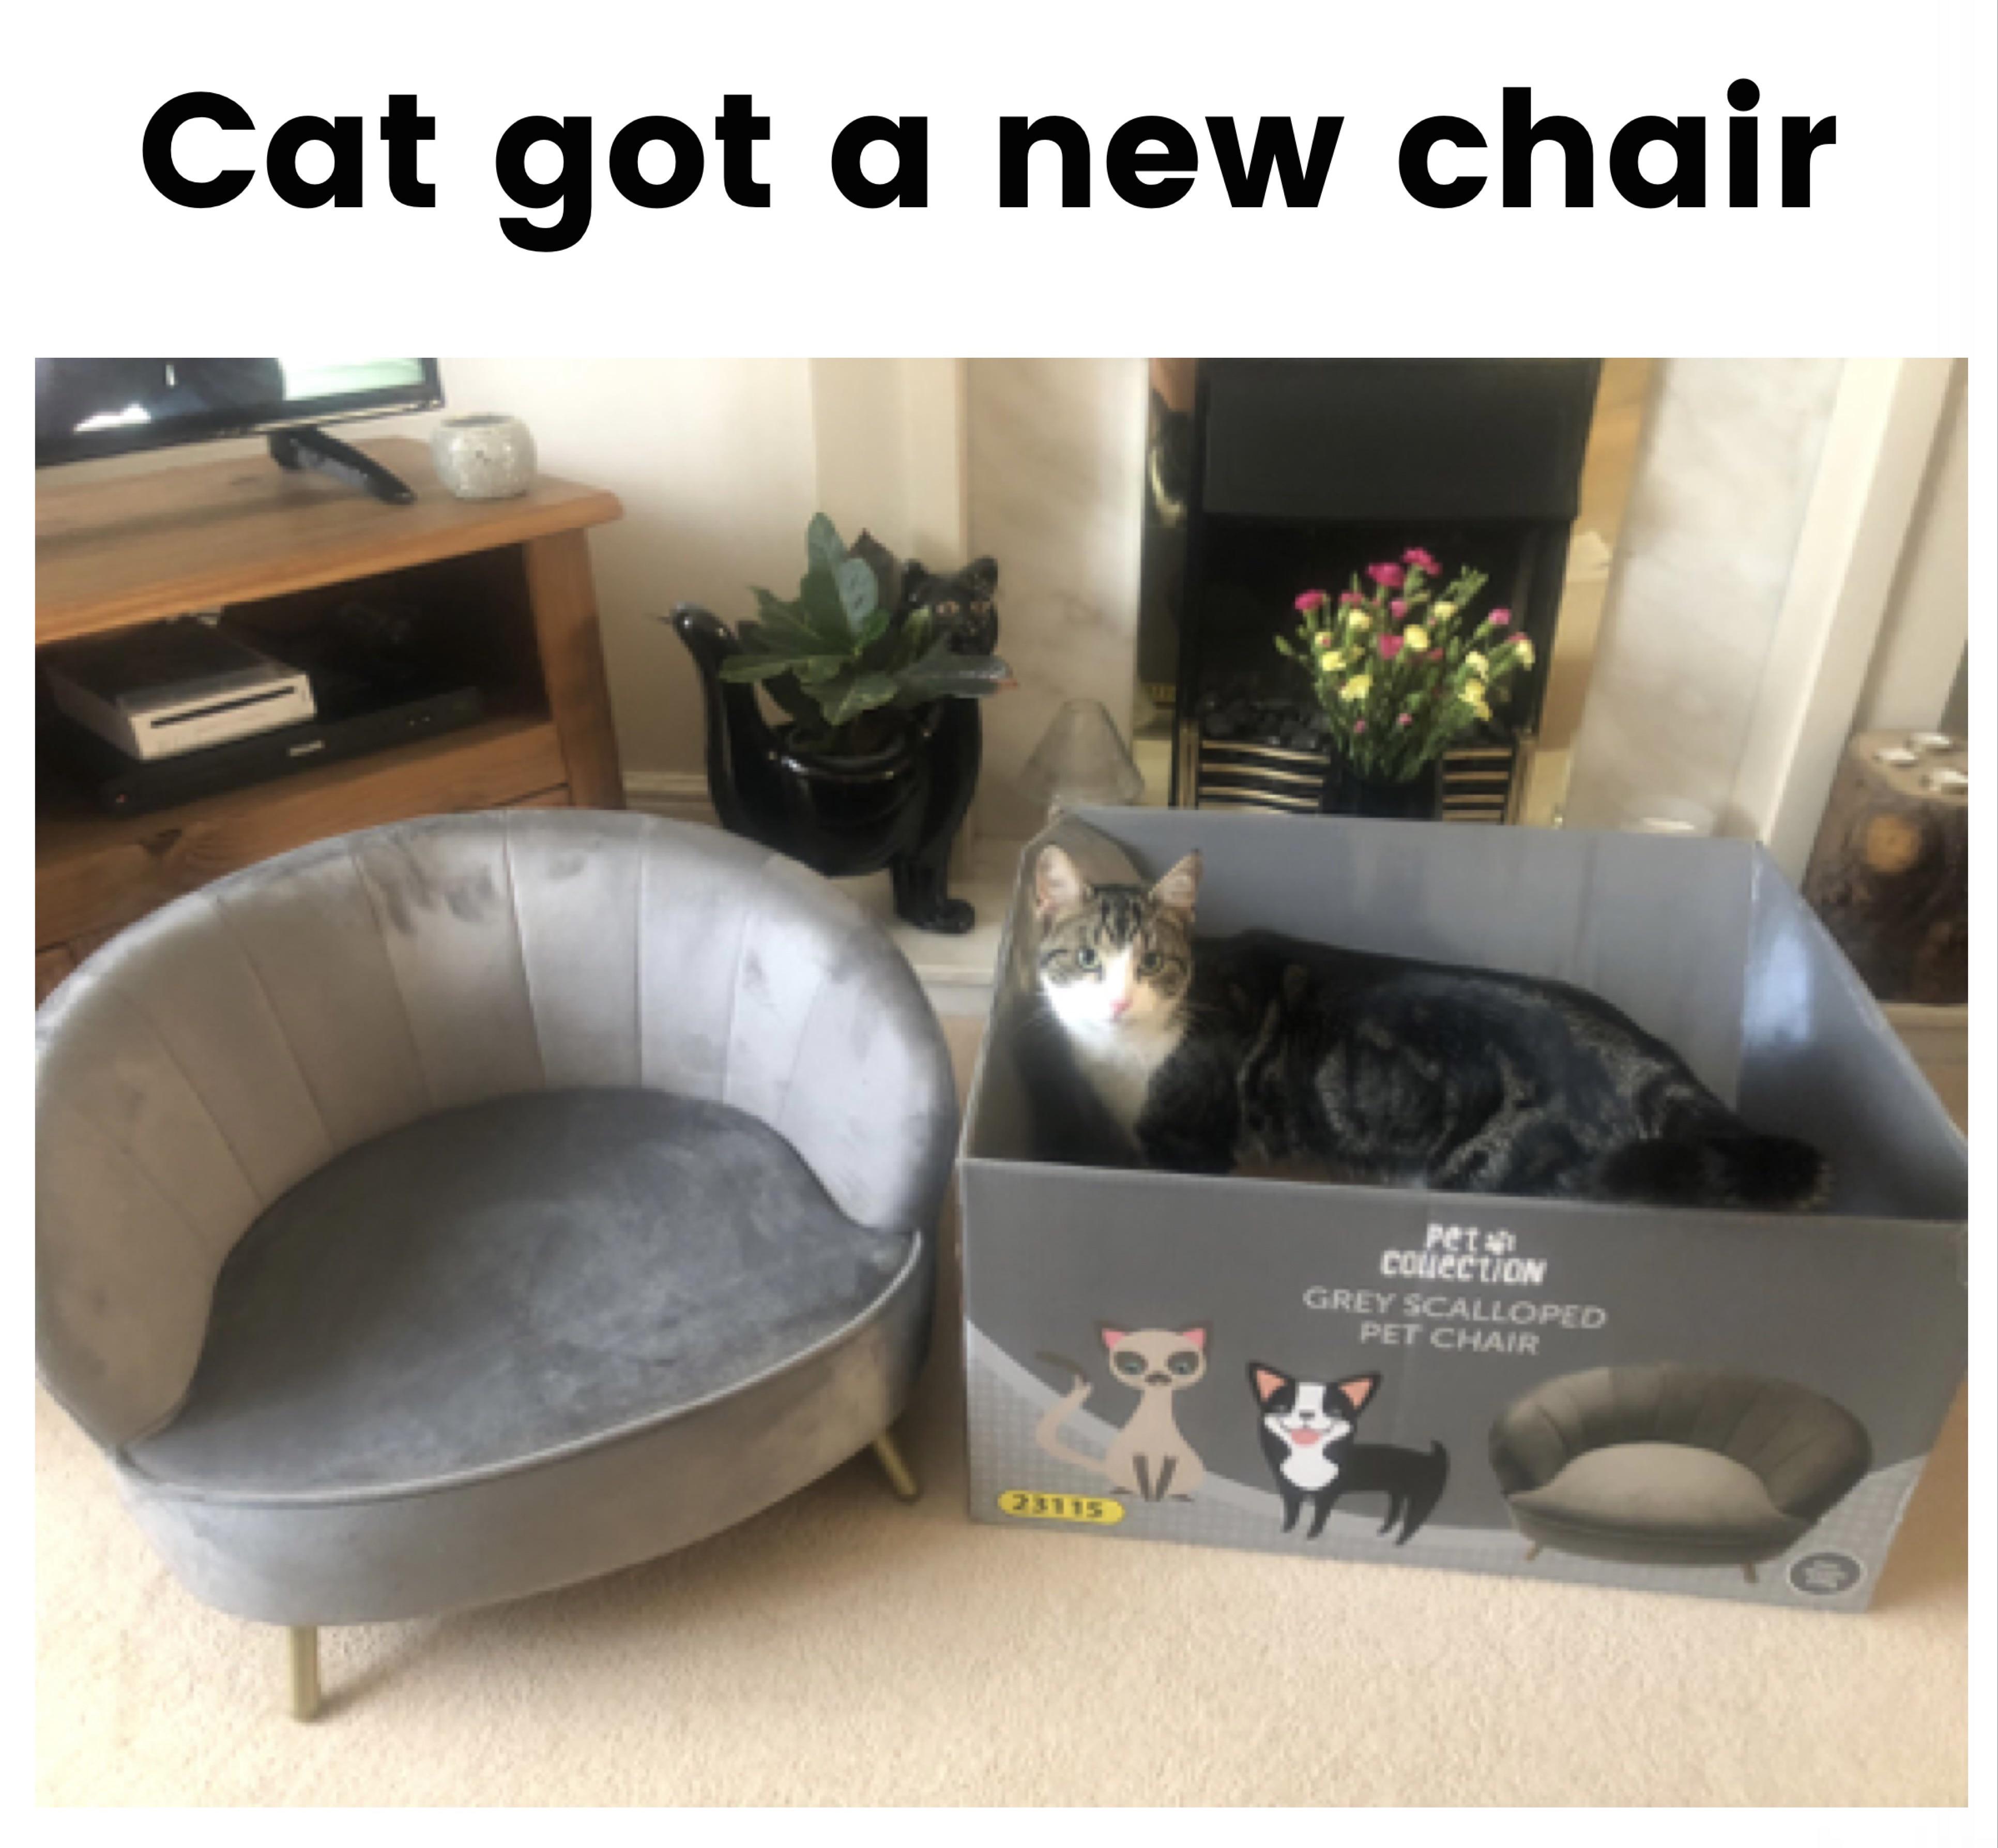 monday morning randomness - table - Cat got a new chair Peta couection Grey Scalloped Pet Chair